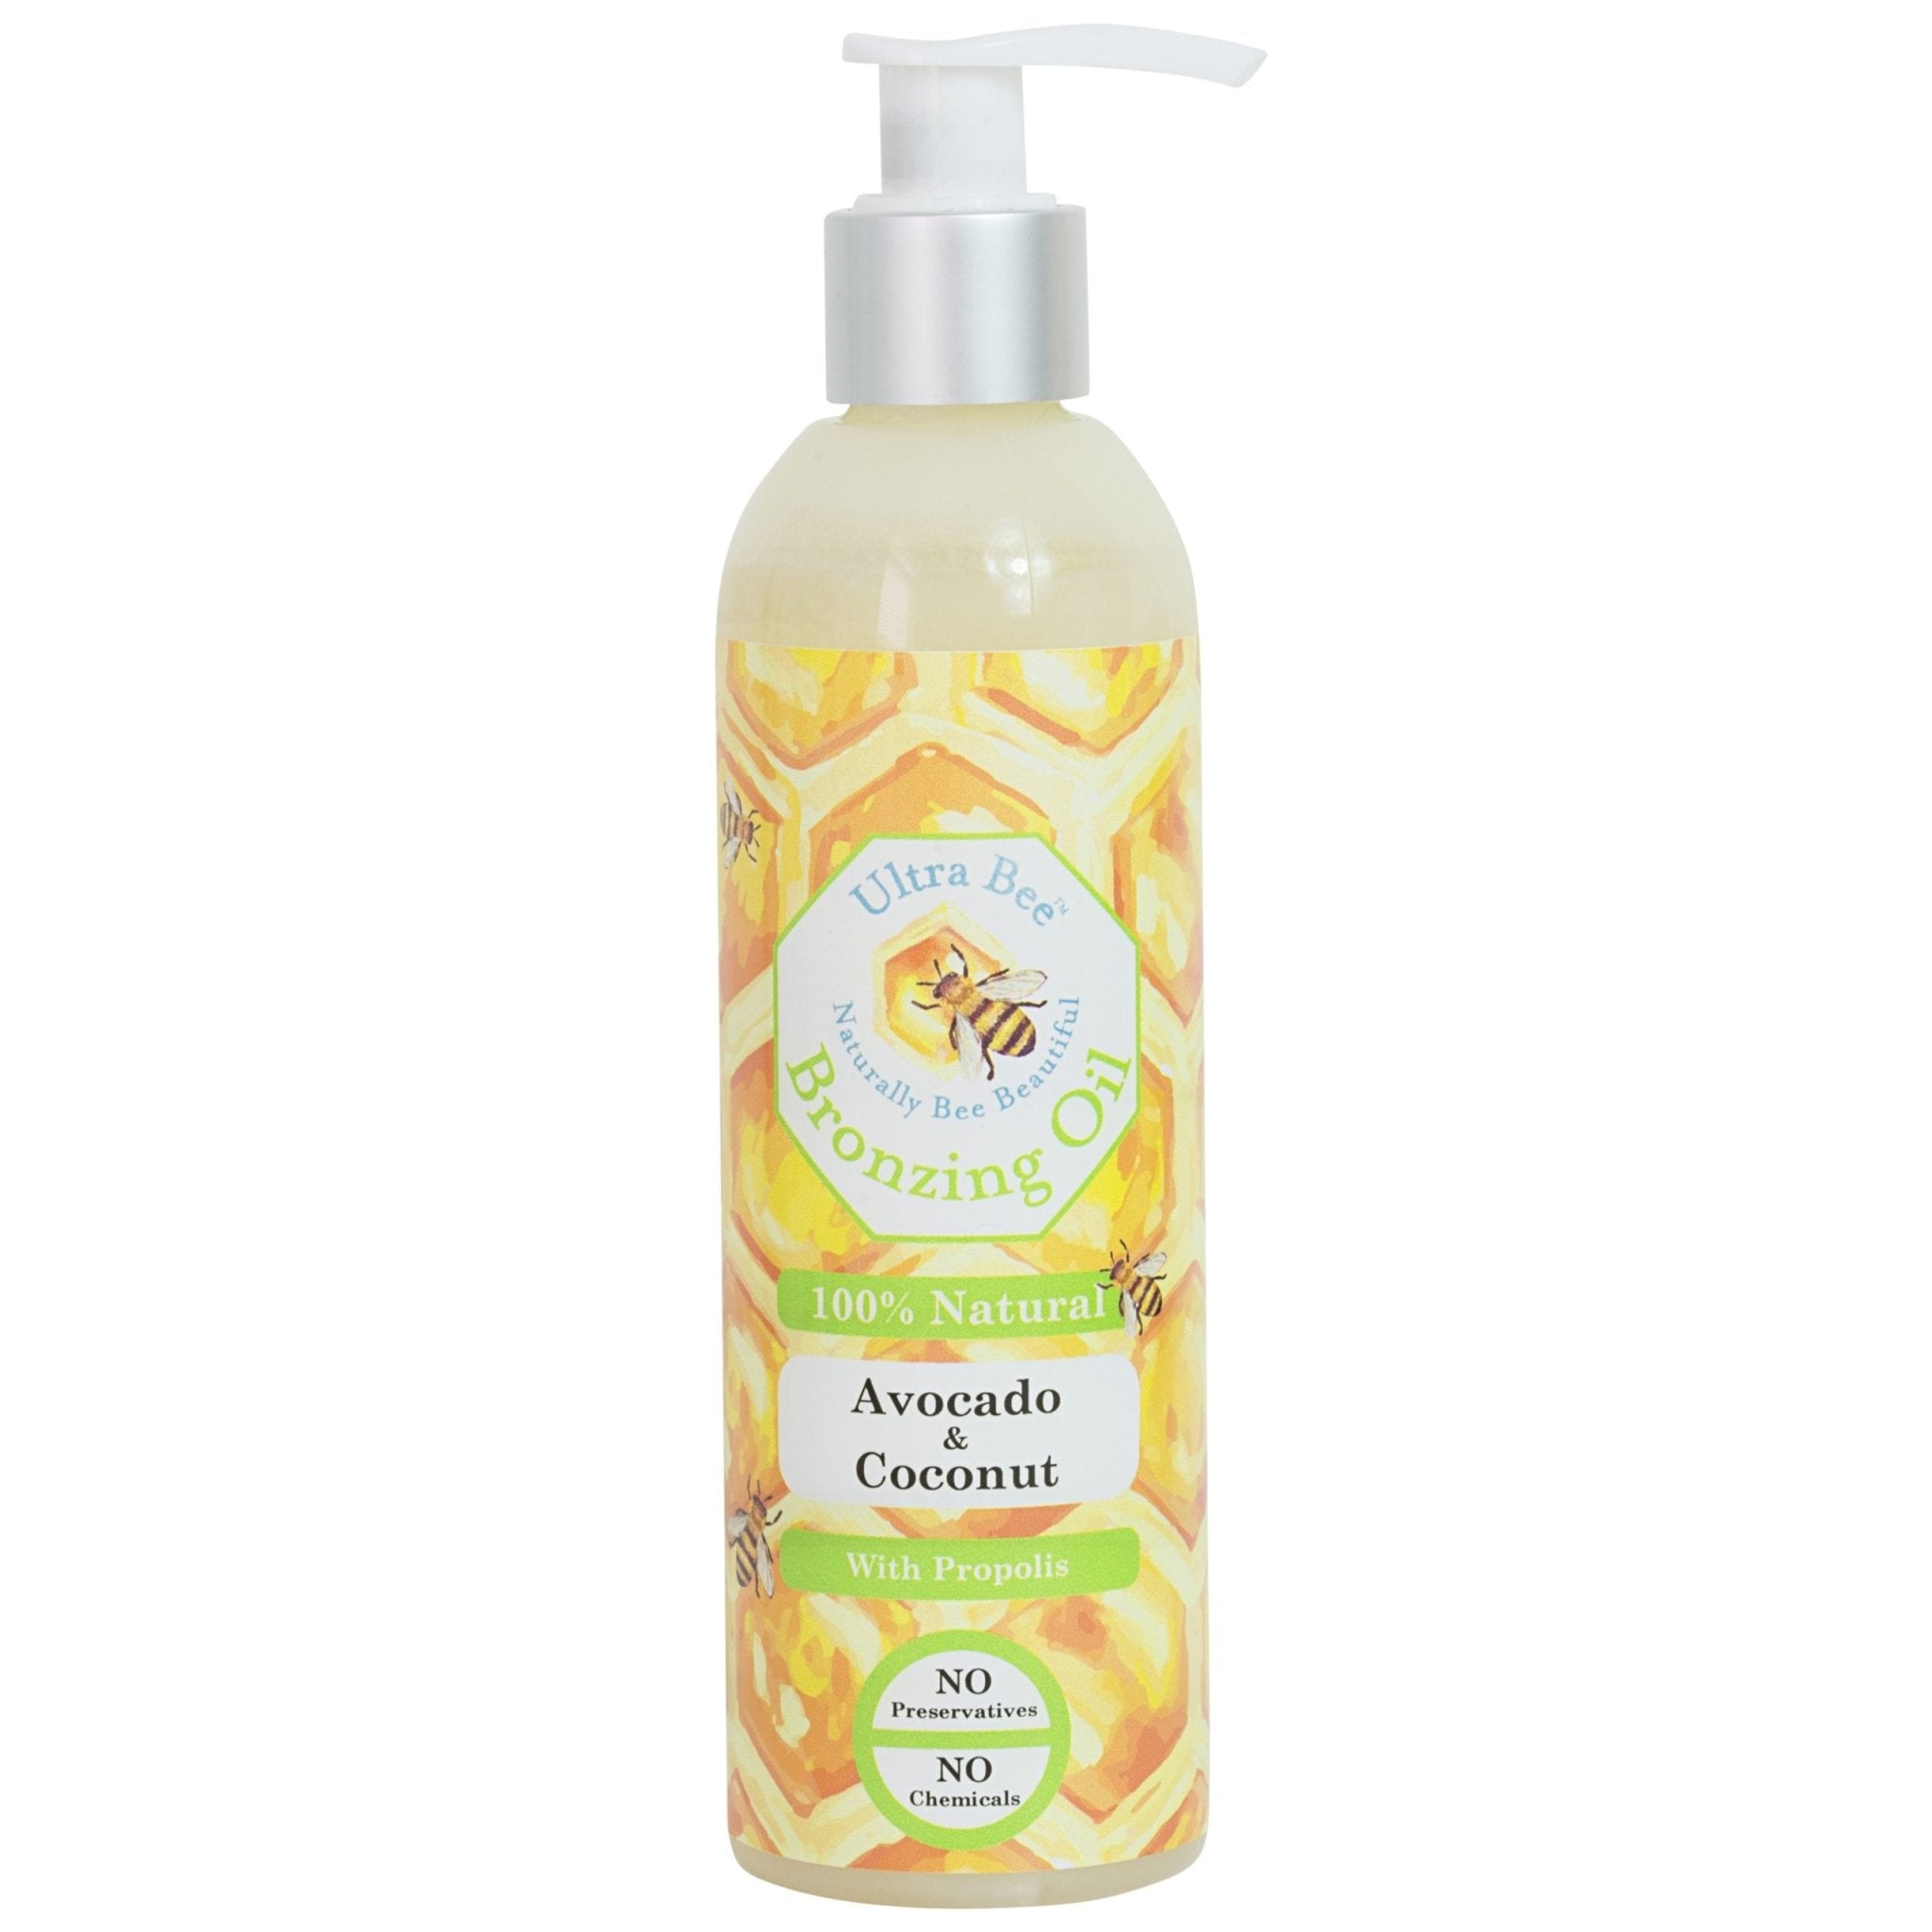 100% Natural Tanning Oil - Avocado & Coconut 250ml - Ultrabee